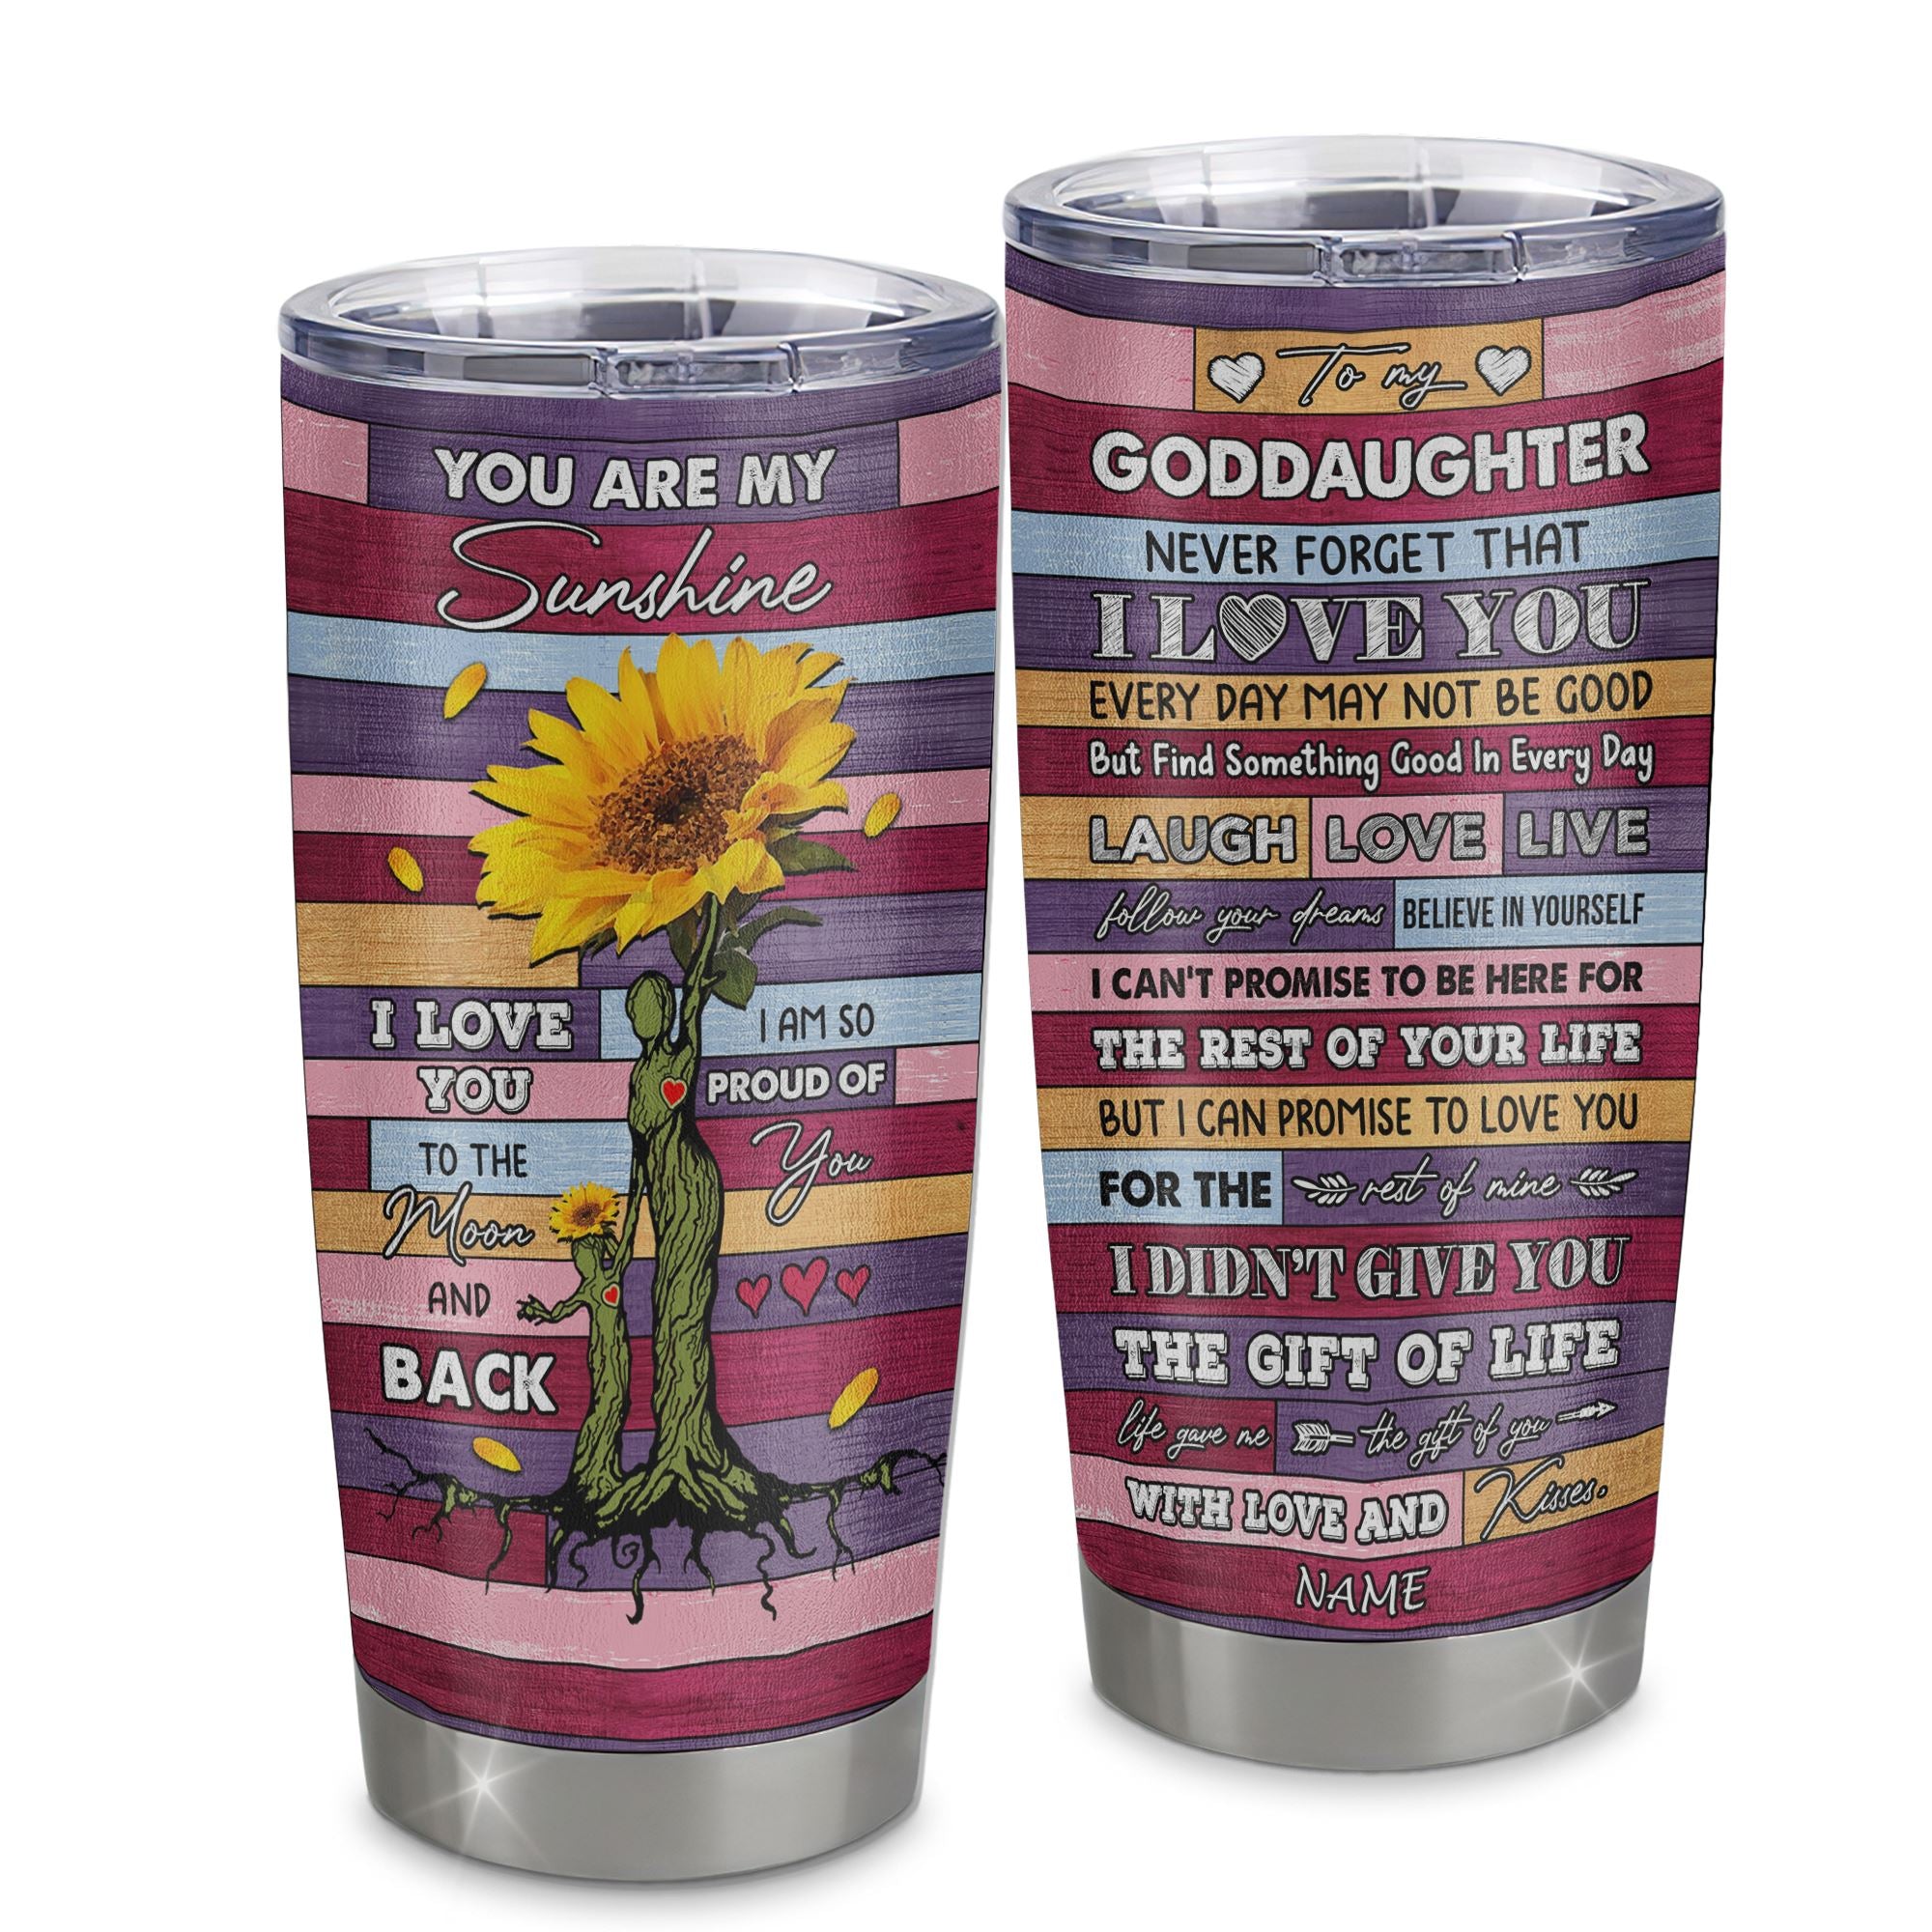 Personalized_To_My_Goddaughter_From_Aunt_Auntie_Stainless_Steel_Tumbler_Cup_Wood_Sunflower_Never_Forget_I_Love_You_Goddaughter_Birthday_Graduation_Christmas_Travel_Mug_Tumbler_mockup-1.jpg